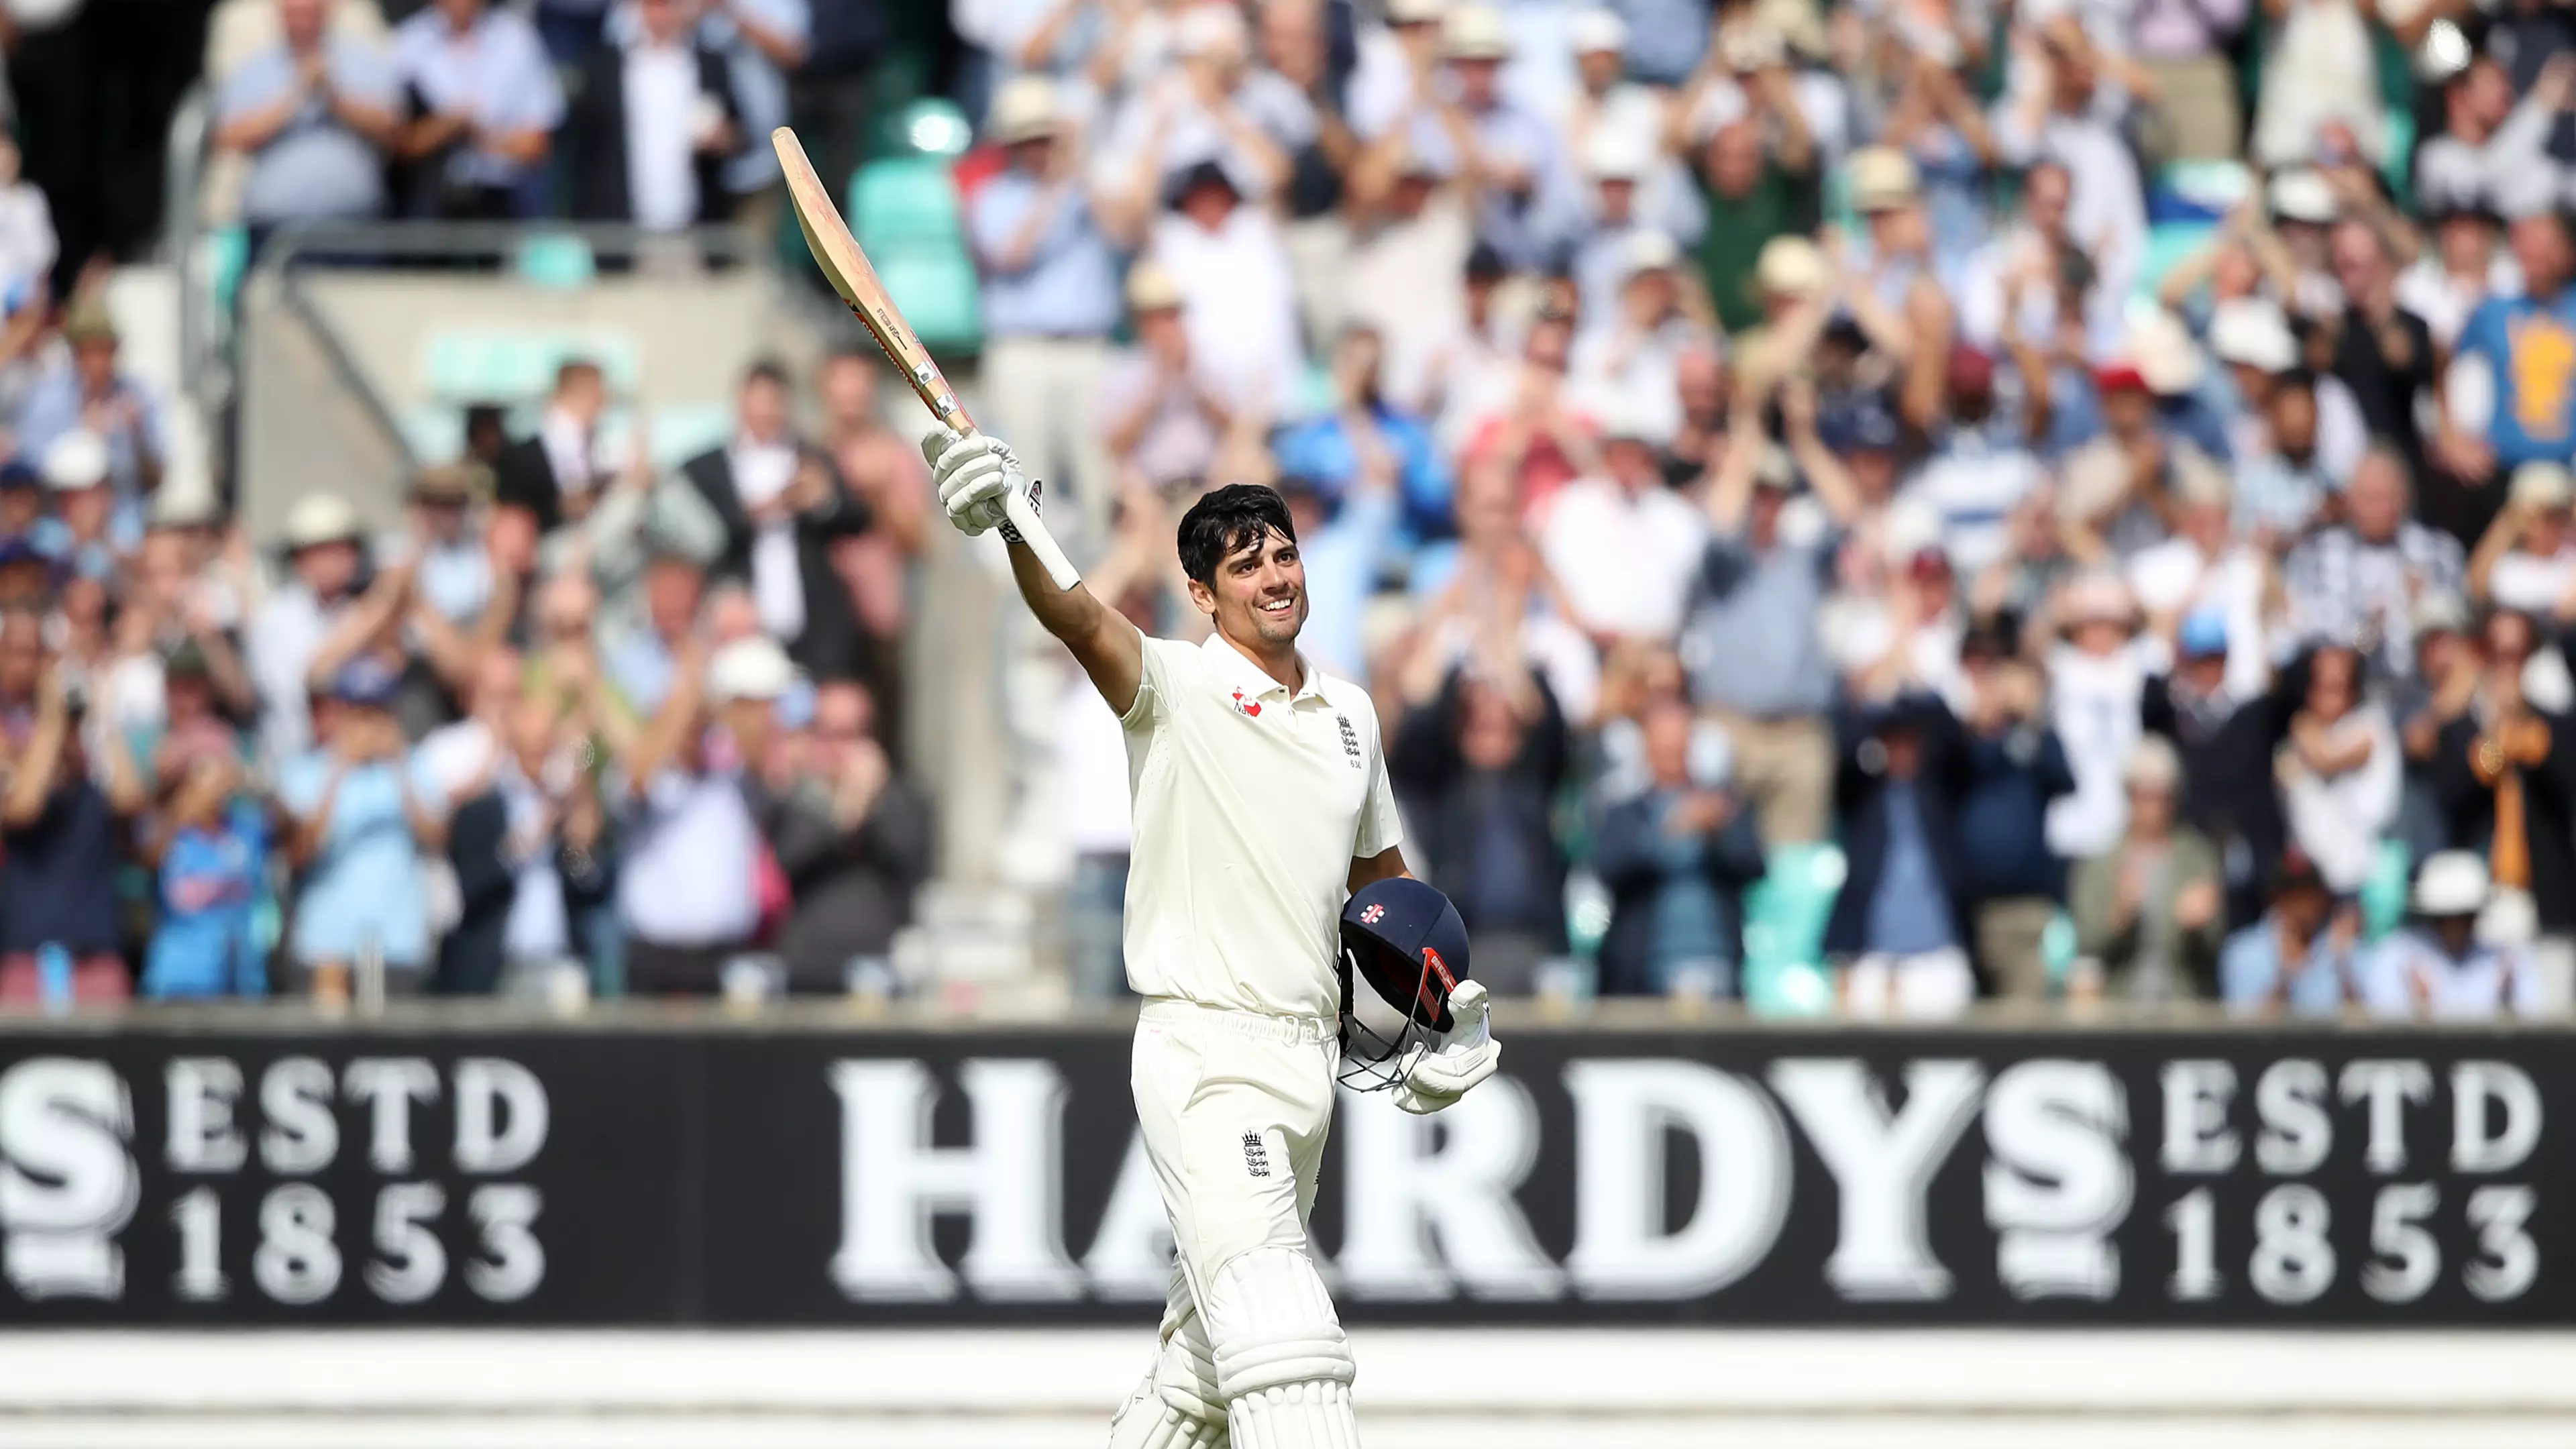 Alastair Cook Hits Century On His Final Test Innings For England